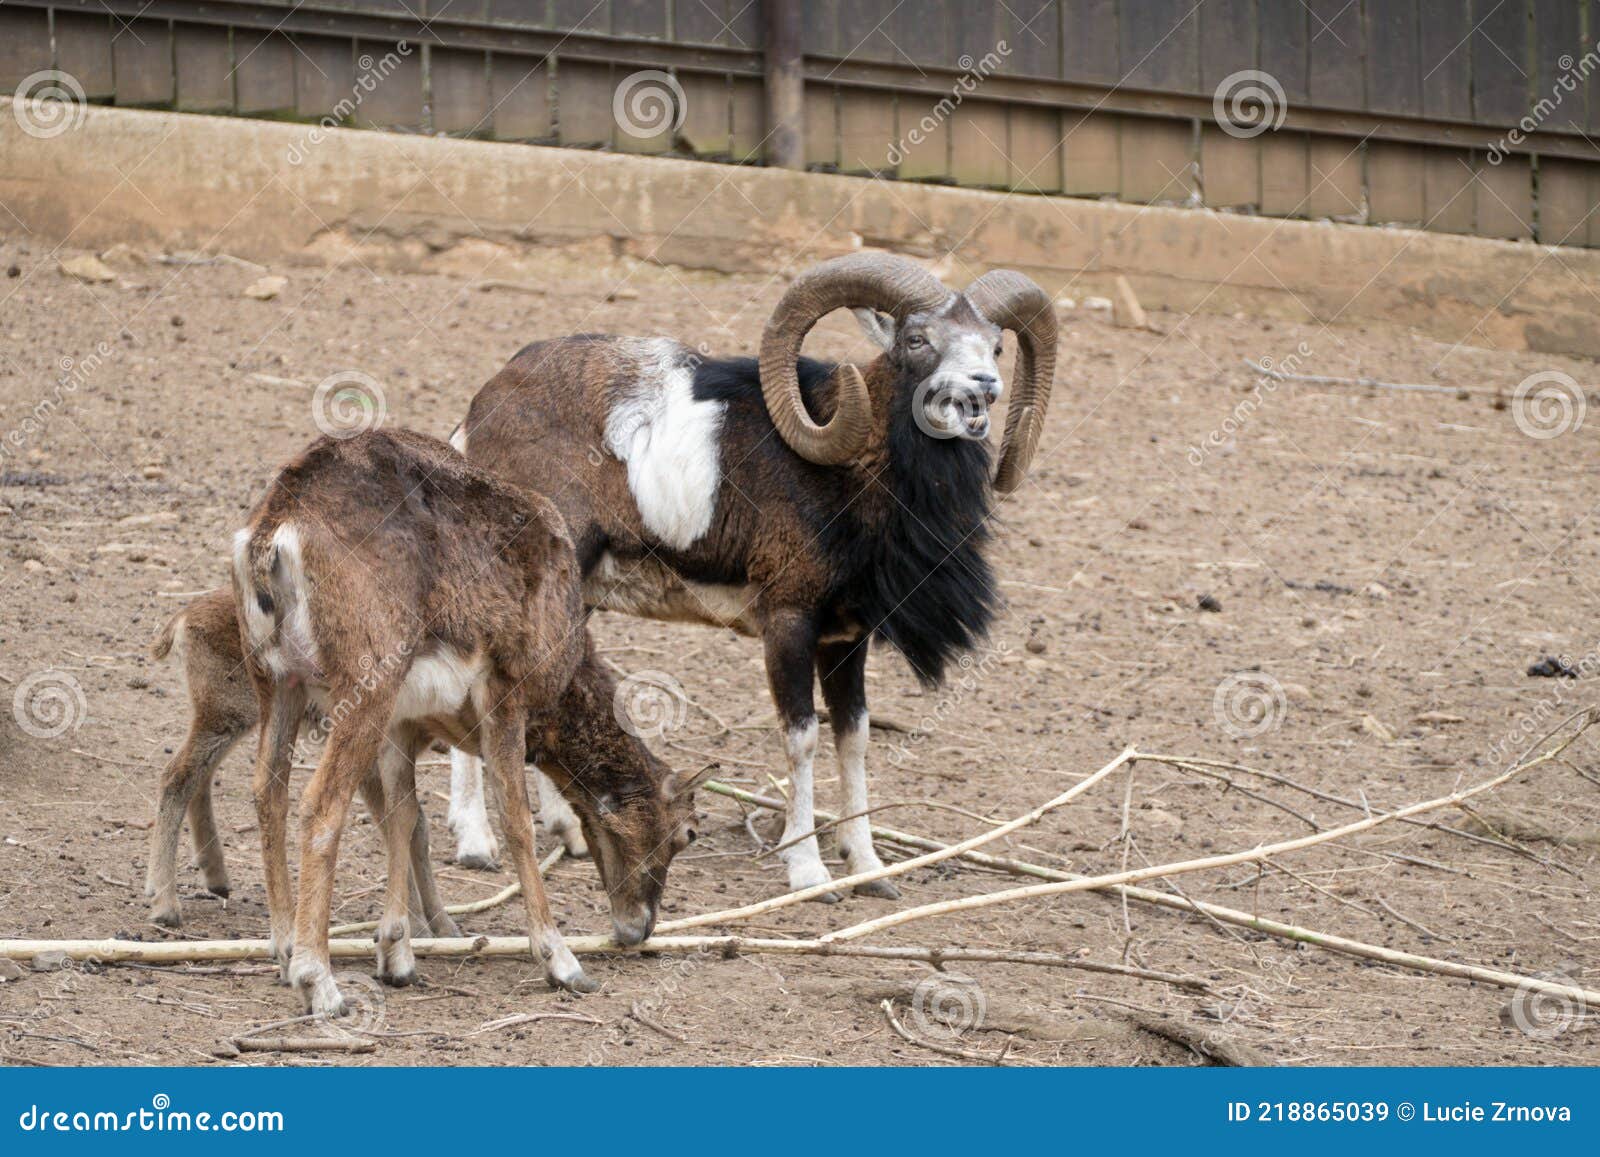 Mouflon in a small zoo stock image. Image of animal - 218865039